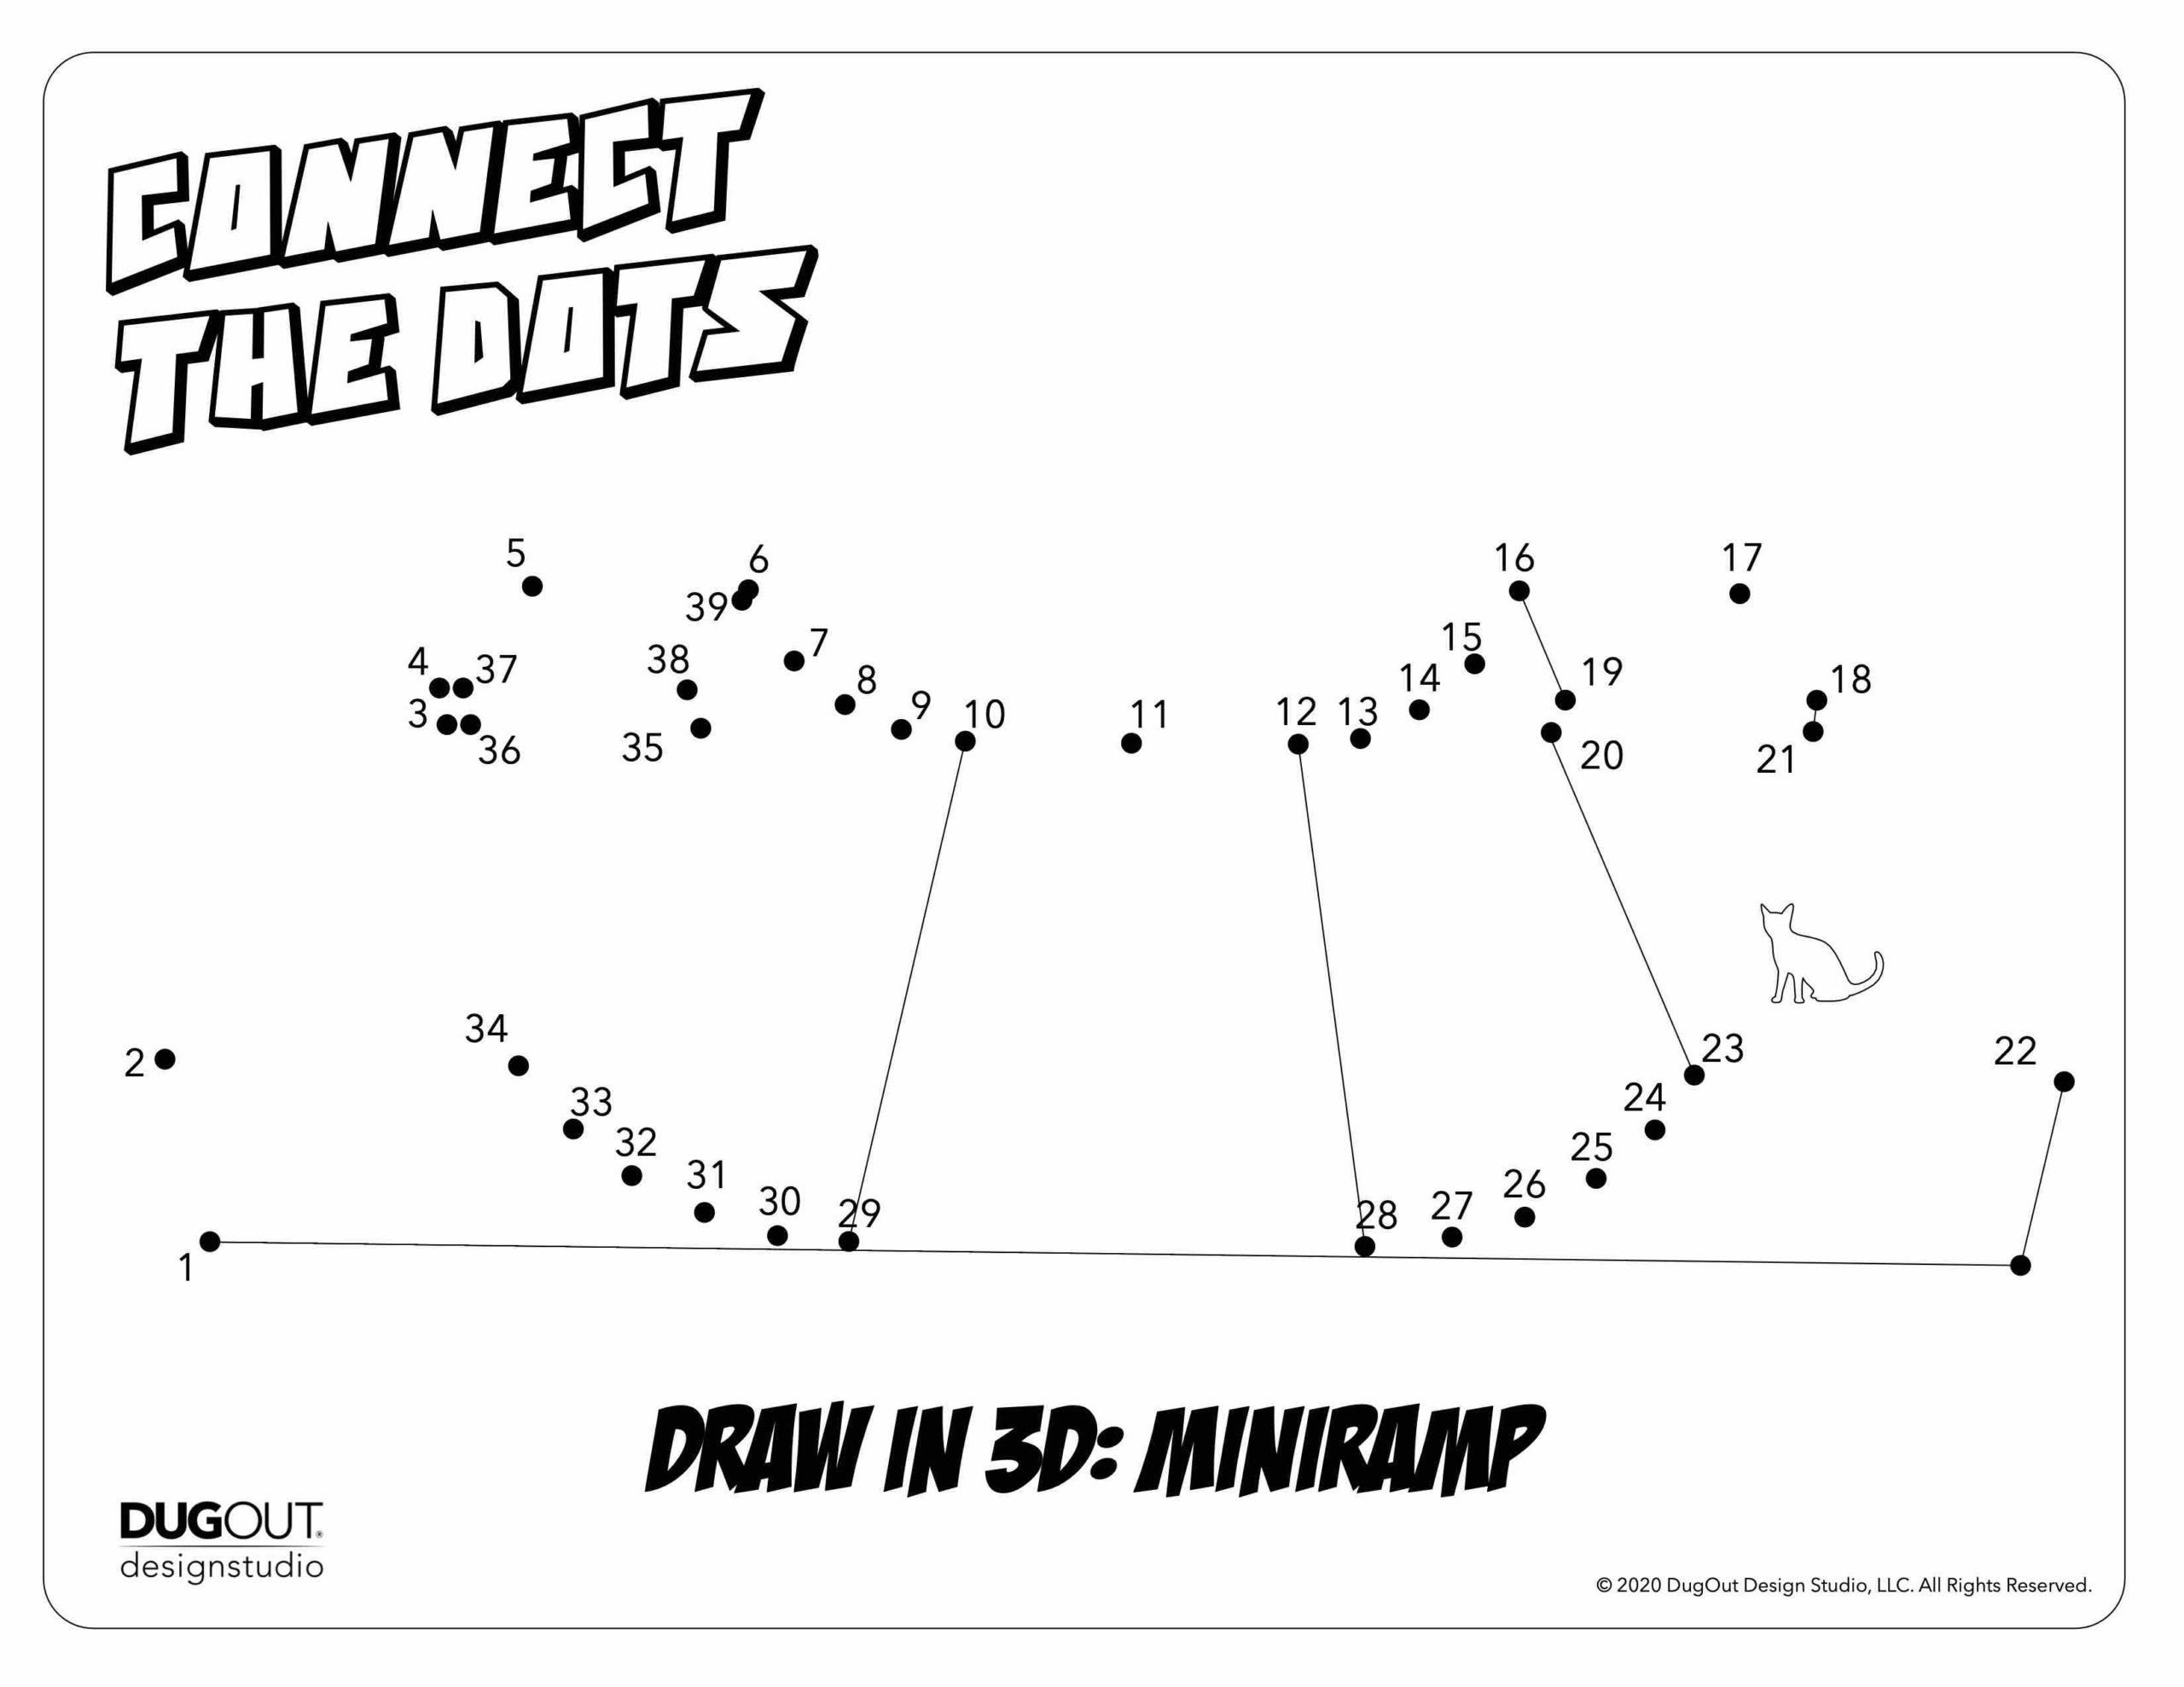 Connect the Dots: Learn to draw a 3D Mini-Ramp